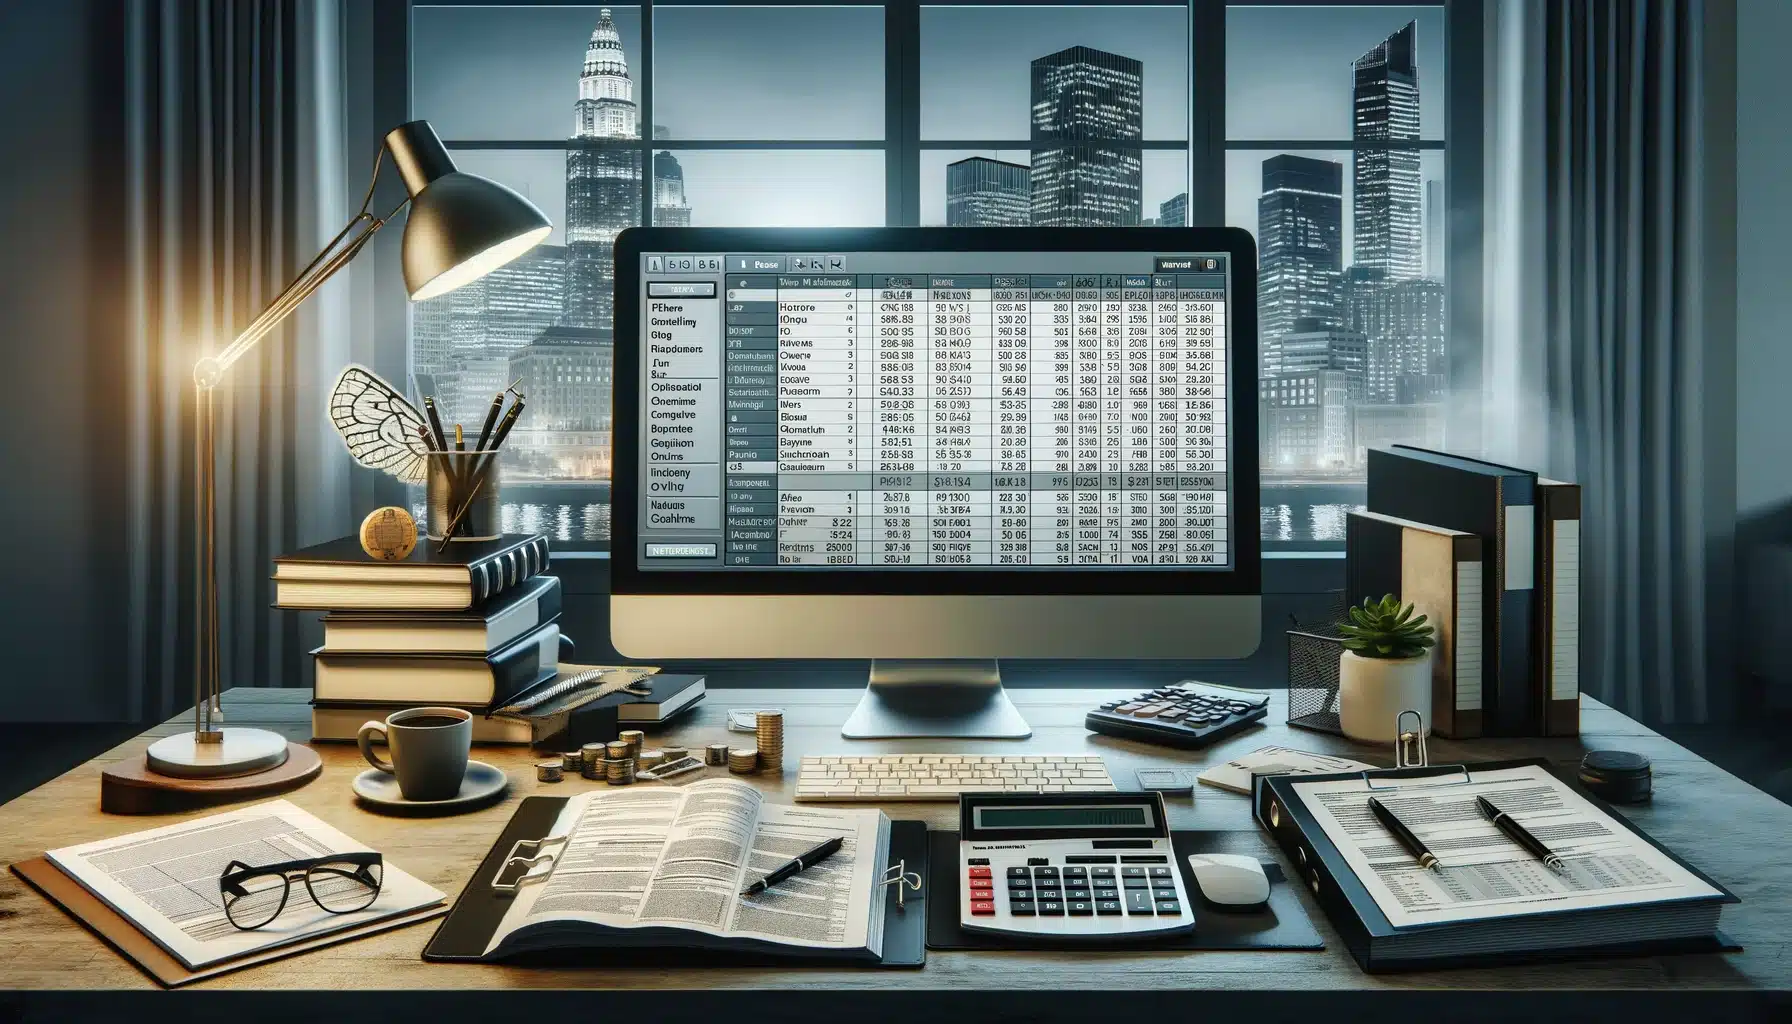 Die Seite für Anfänger - Steuern - A contemporary office setting focusing on tax preparation, featuring a large monitor displaying tax software and spreadsheets.